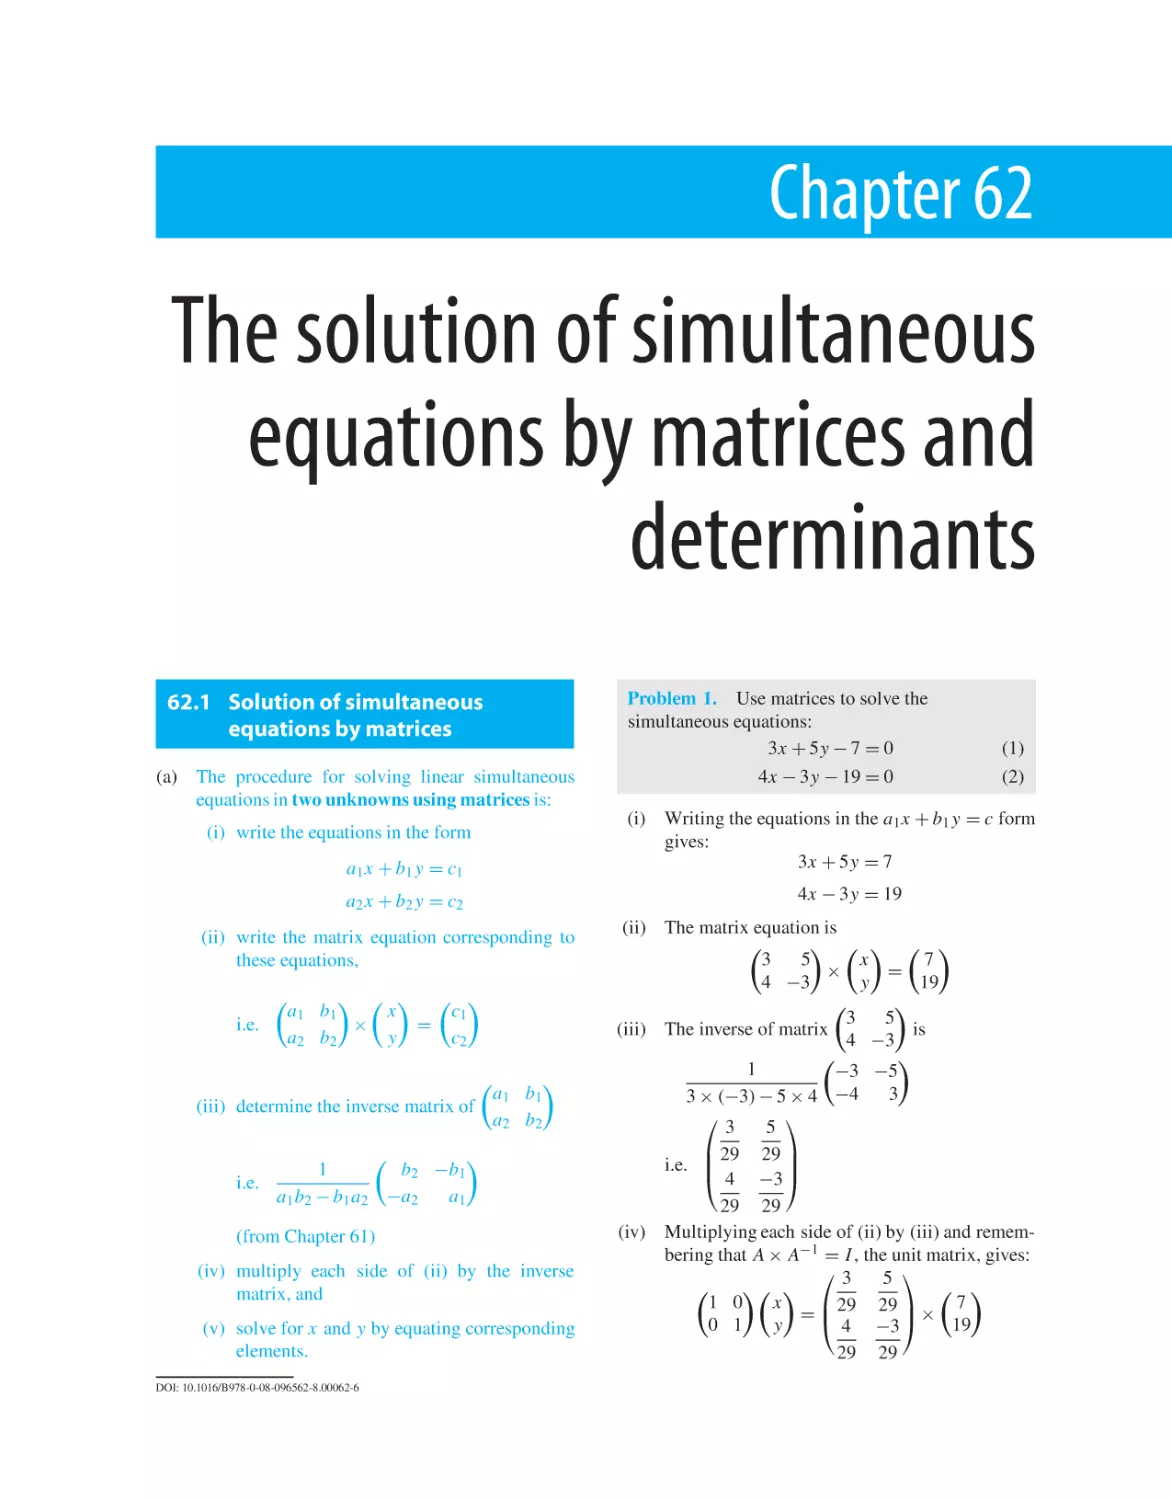 Chapter 62. The solution of simultaneous equations by matrices and determinants
62.1 Solution of simultaneous equations by matrices